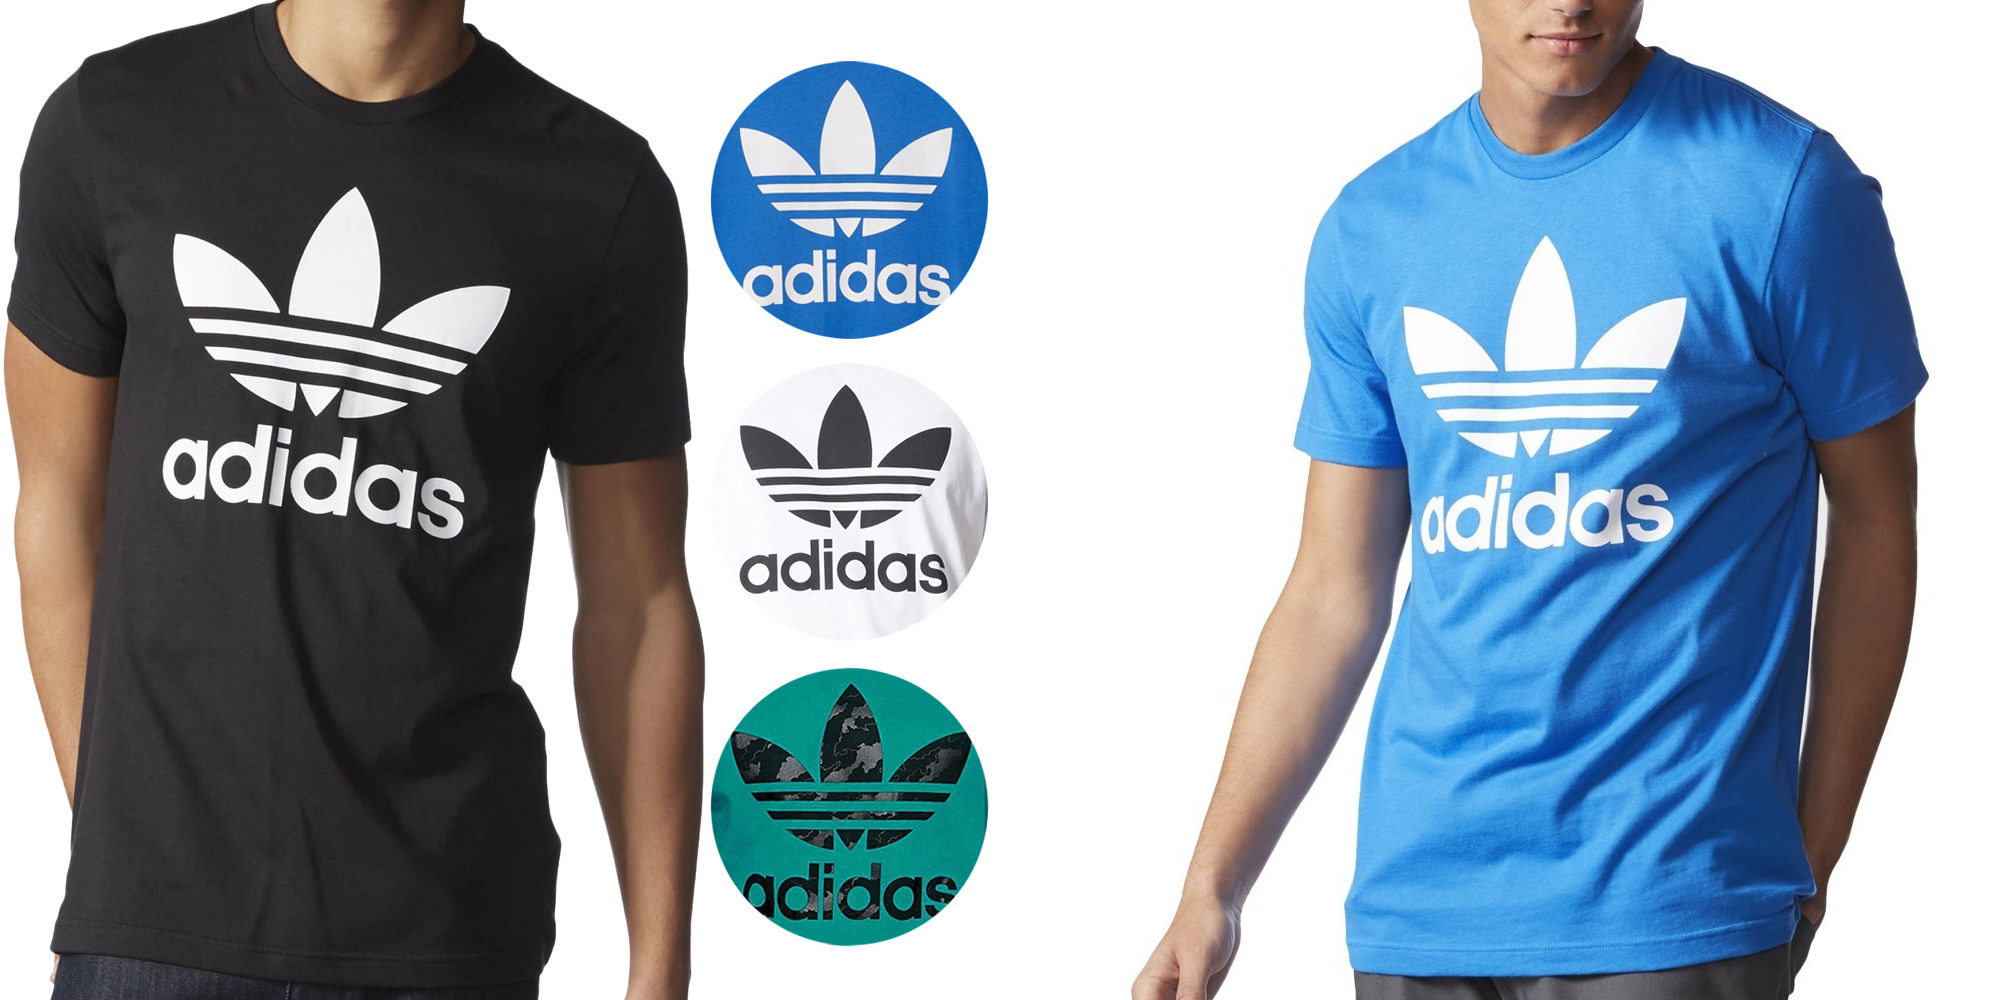 Men’s Adidas Graphic Tee Only $13.99 Shipped!